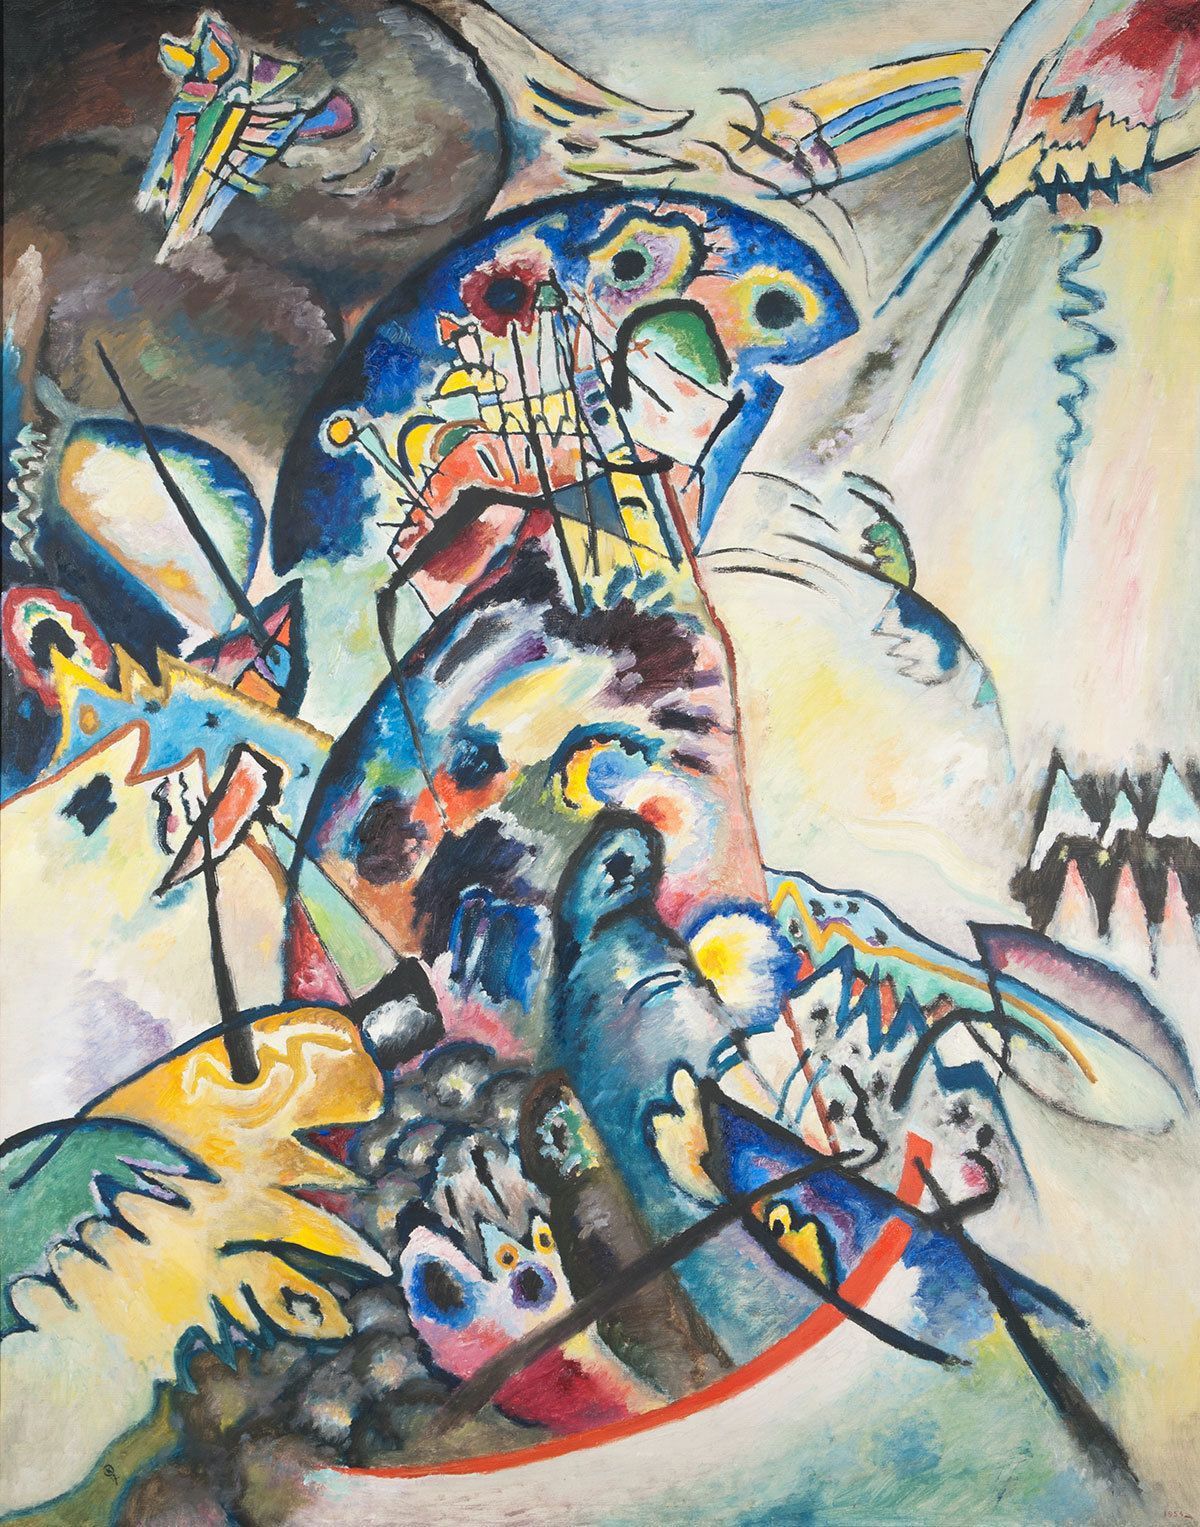 Blue Crest by Wassily Kandinsky (1917) is currently on show in Saudi Arabia Wikicommons